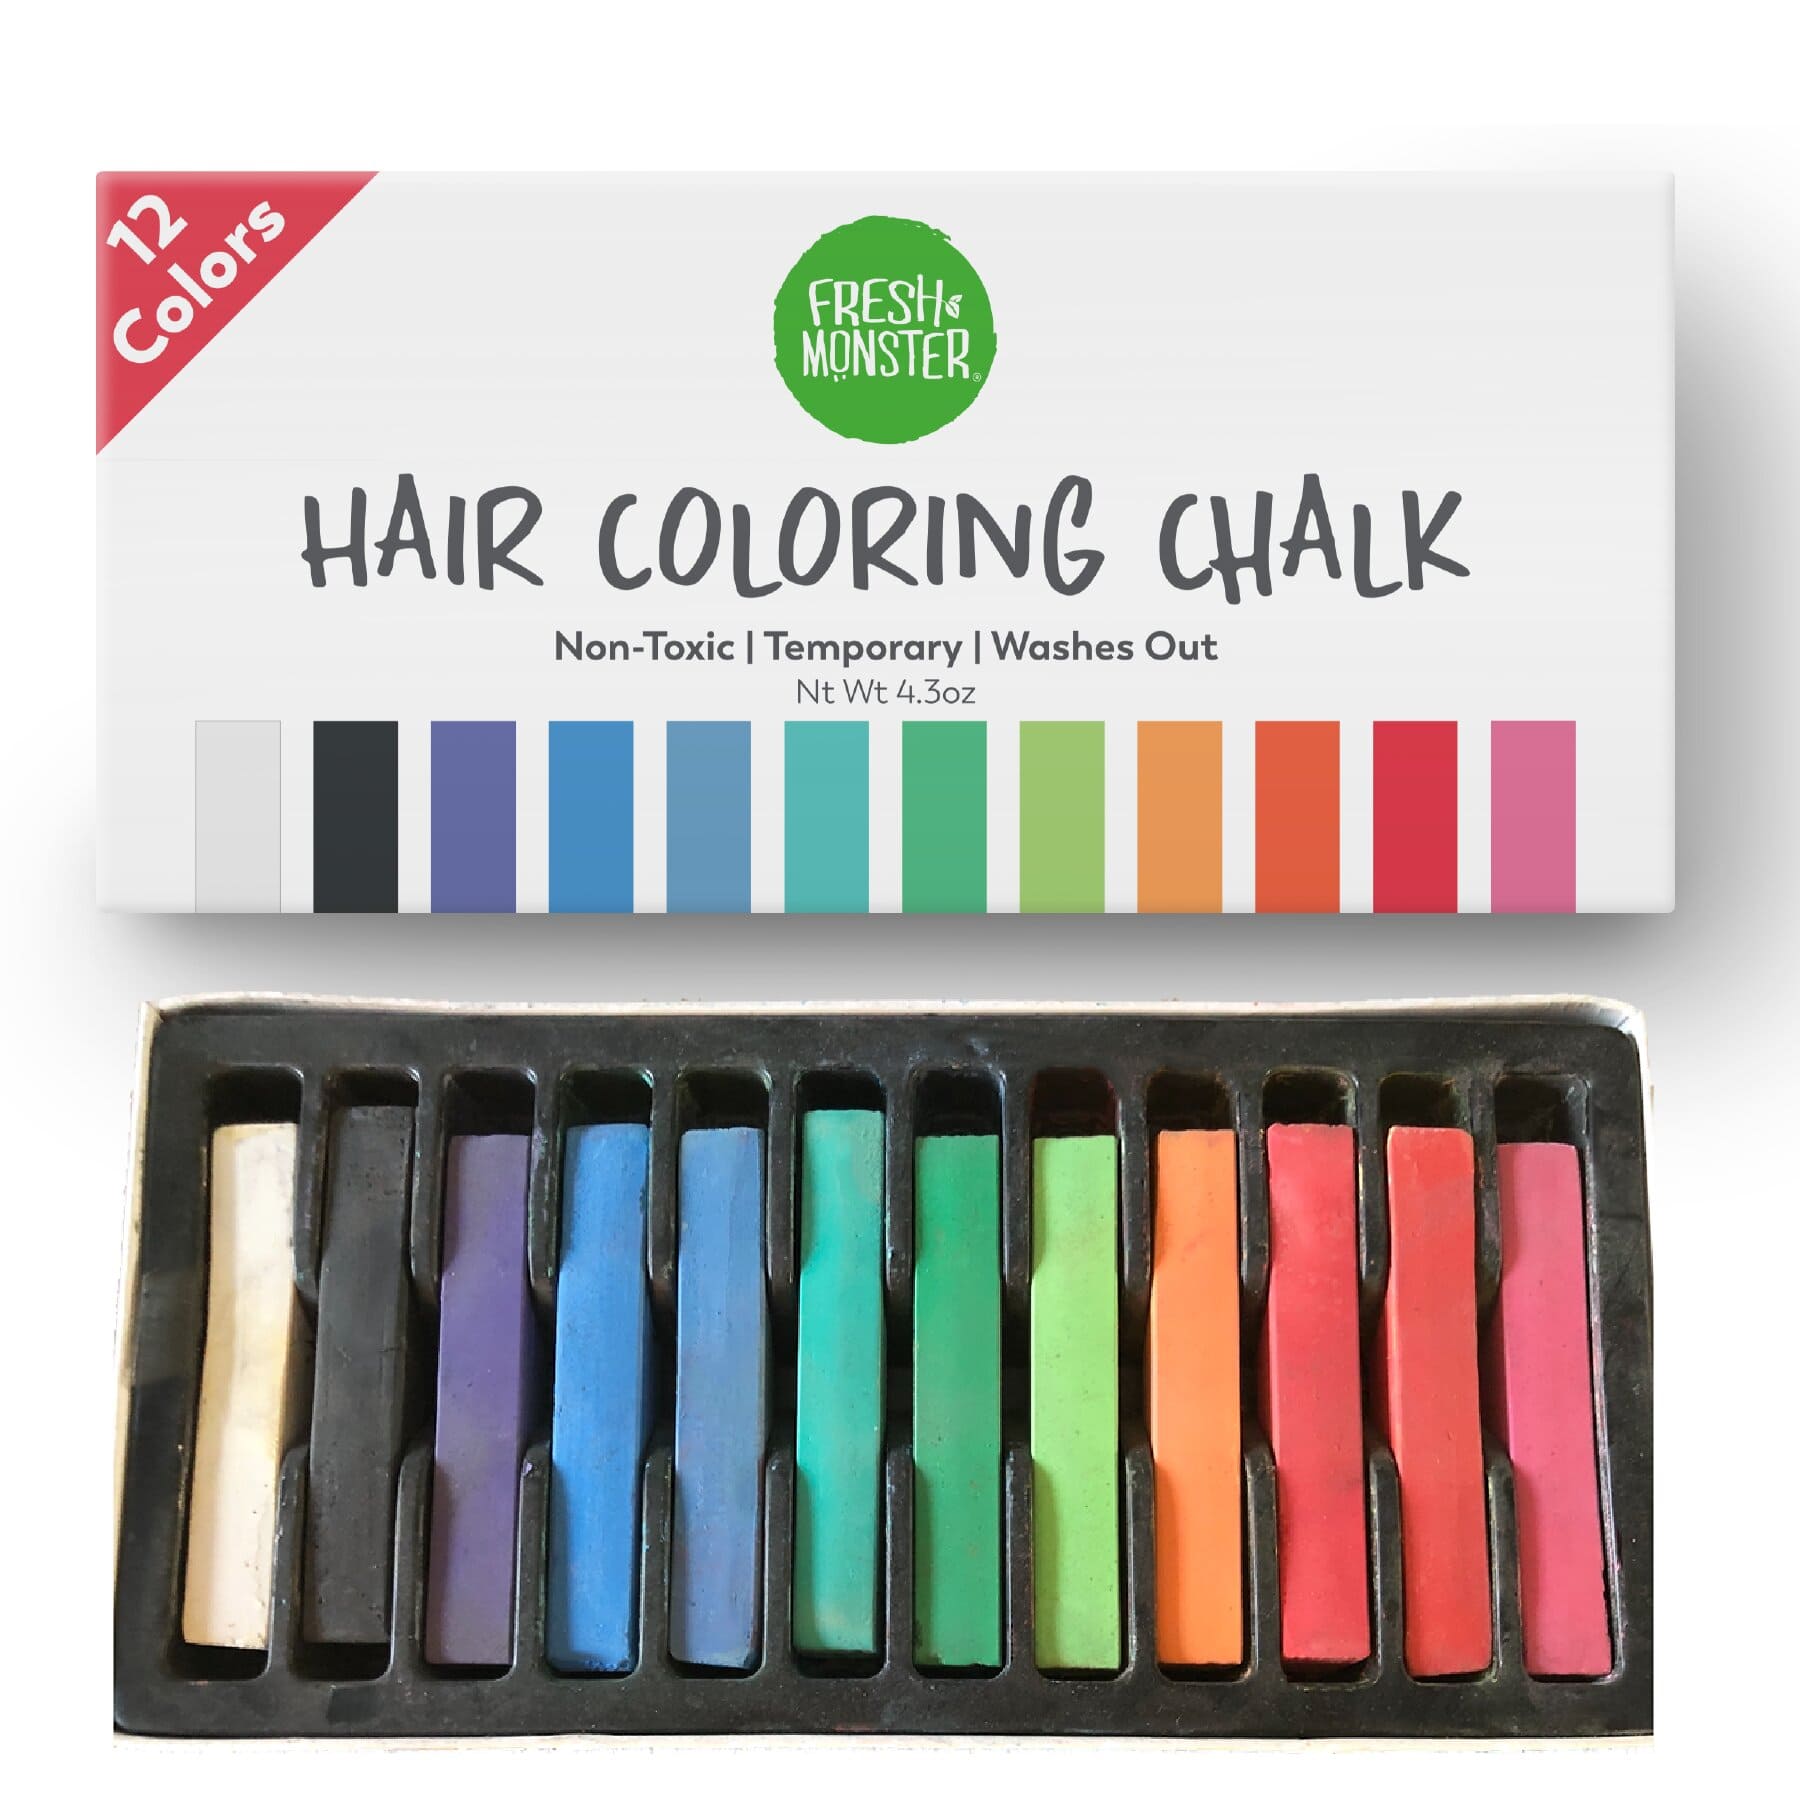 Fresh Monster Temporary Hair Coloring Chalk 12 Bright Colors Washes Out Easily Girls and Boys Non-Toxic and Safe for All Ages Hair Colors and Textures